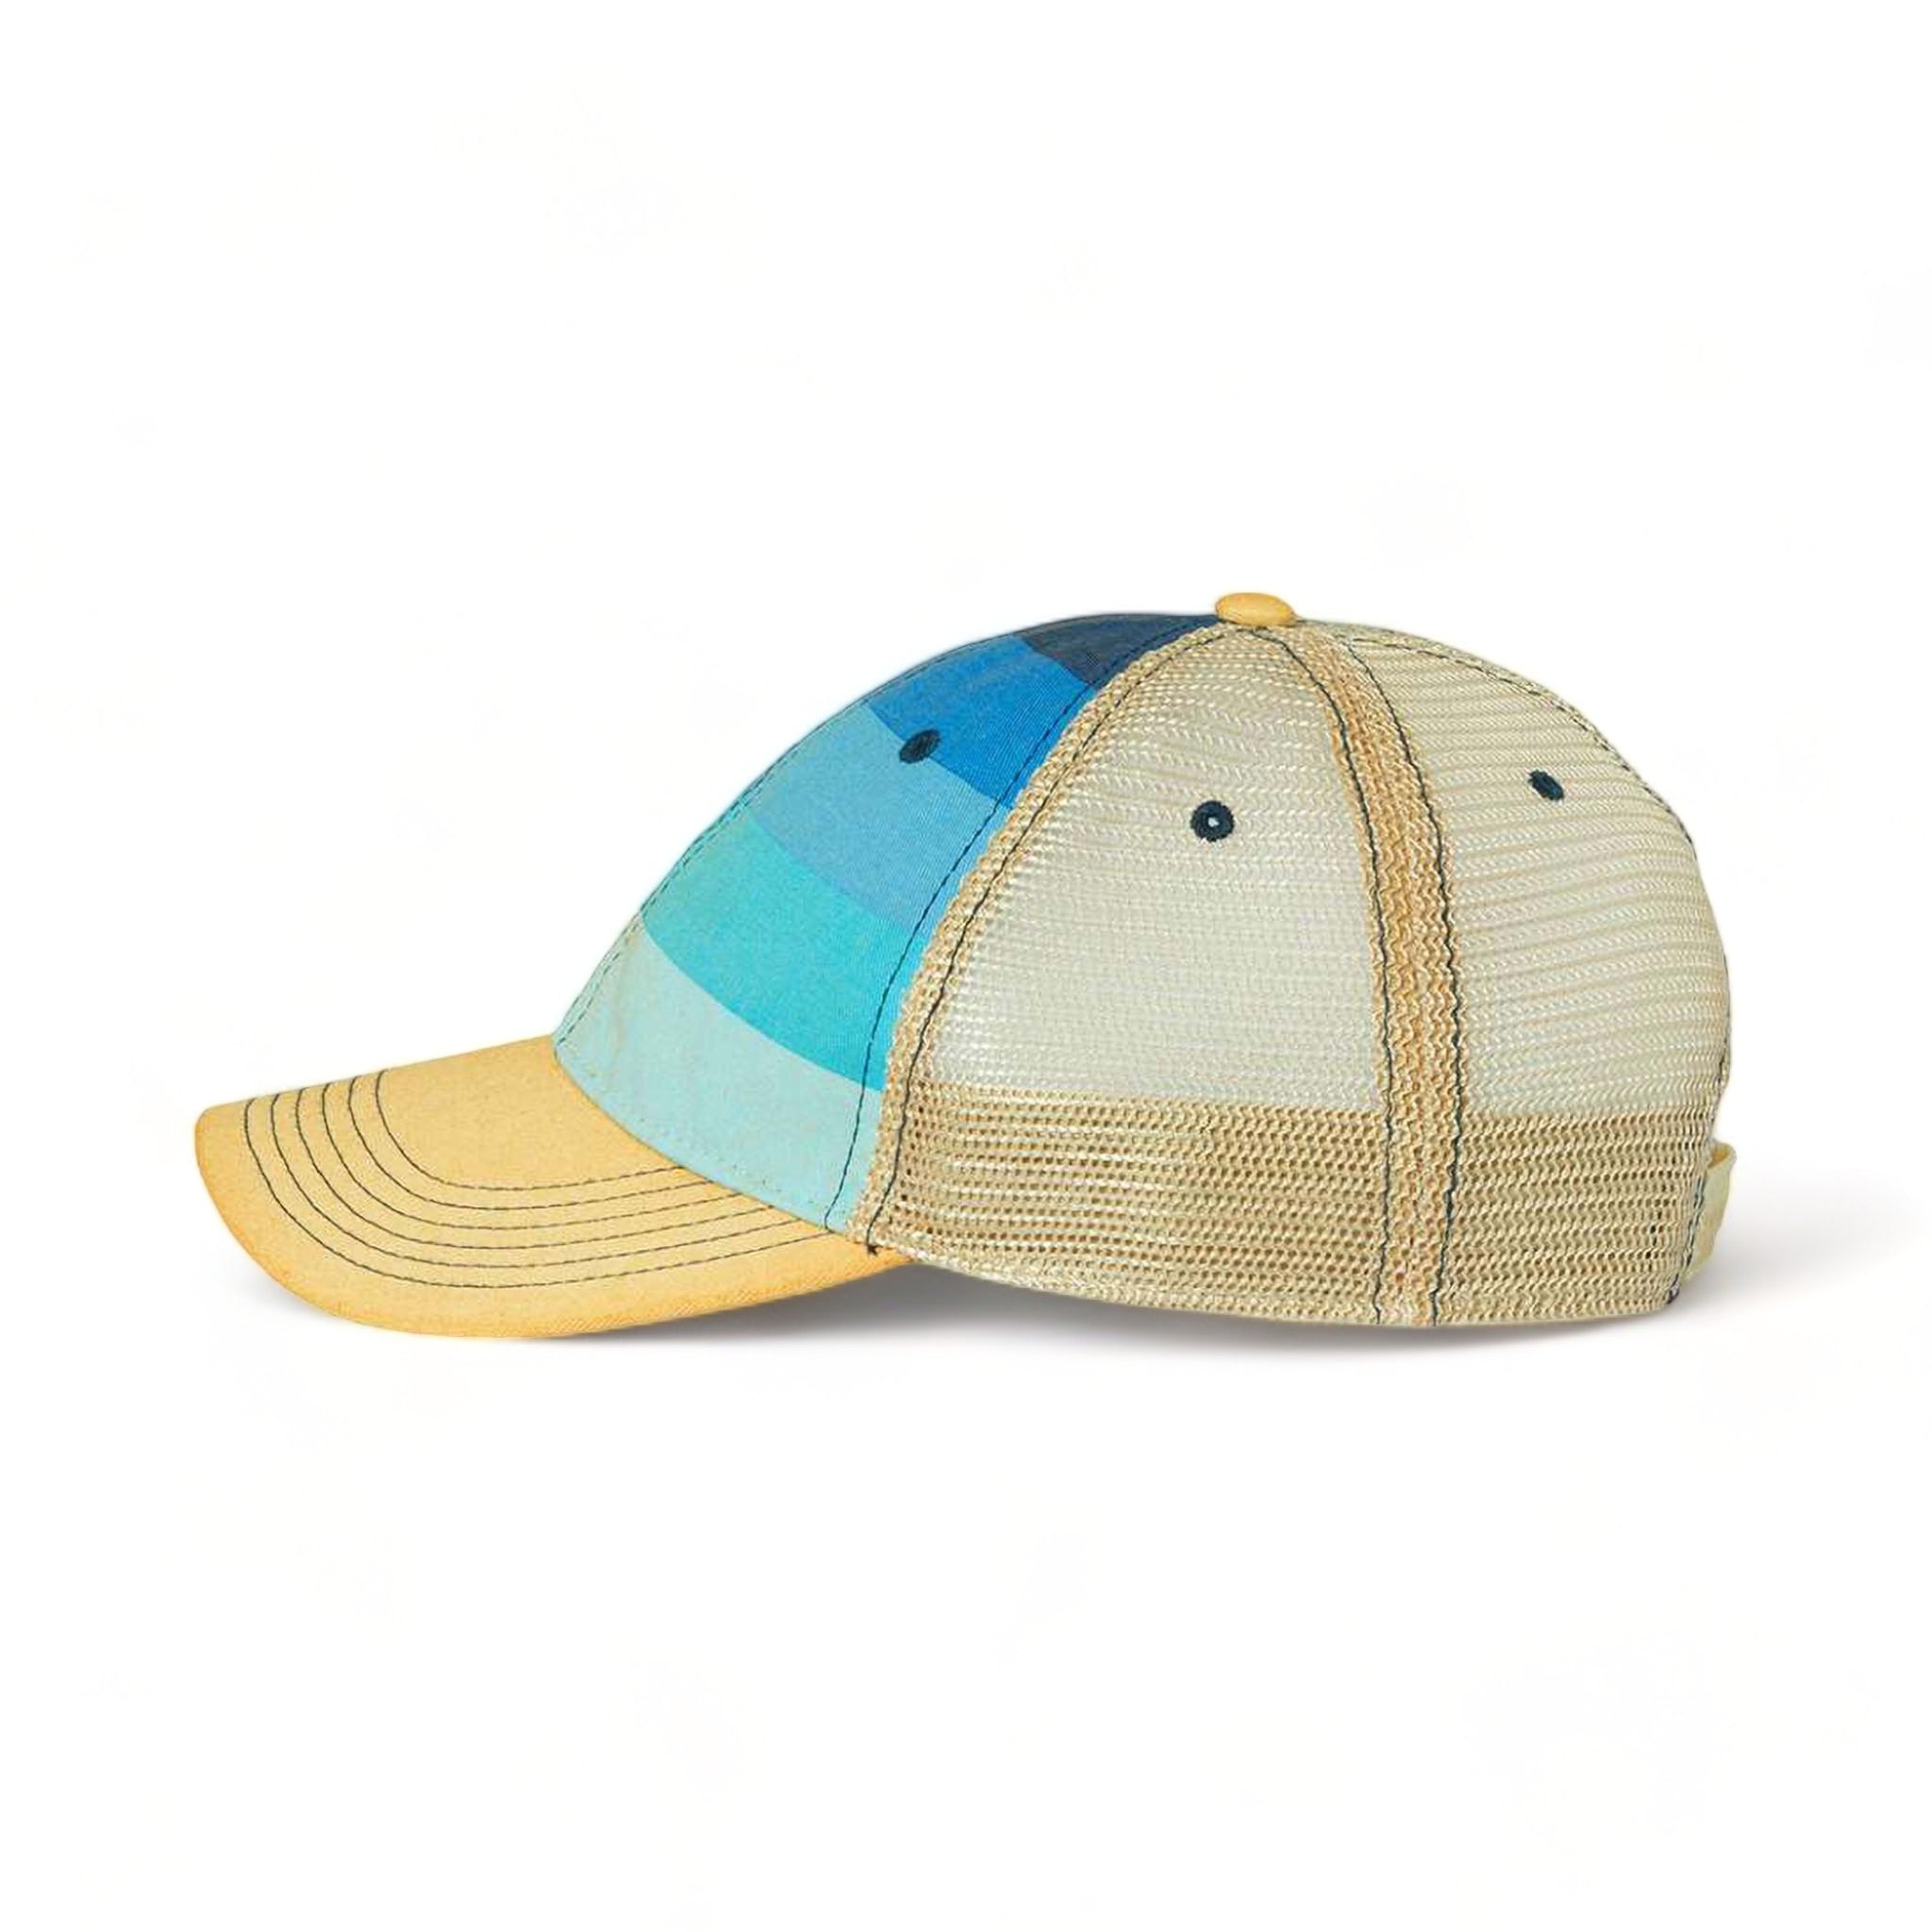 Side view of LEGACY OFA custom hat in blue stripe and khaki